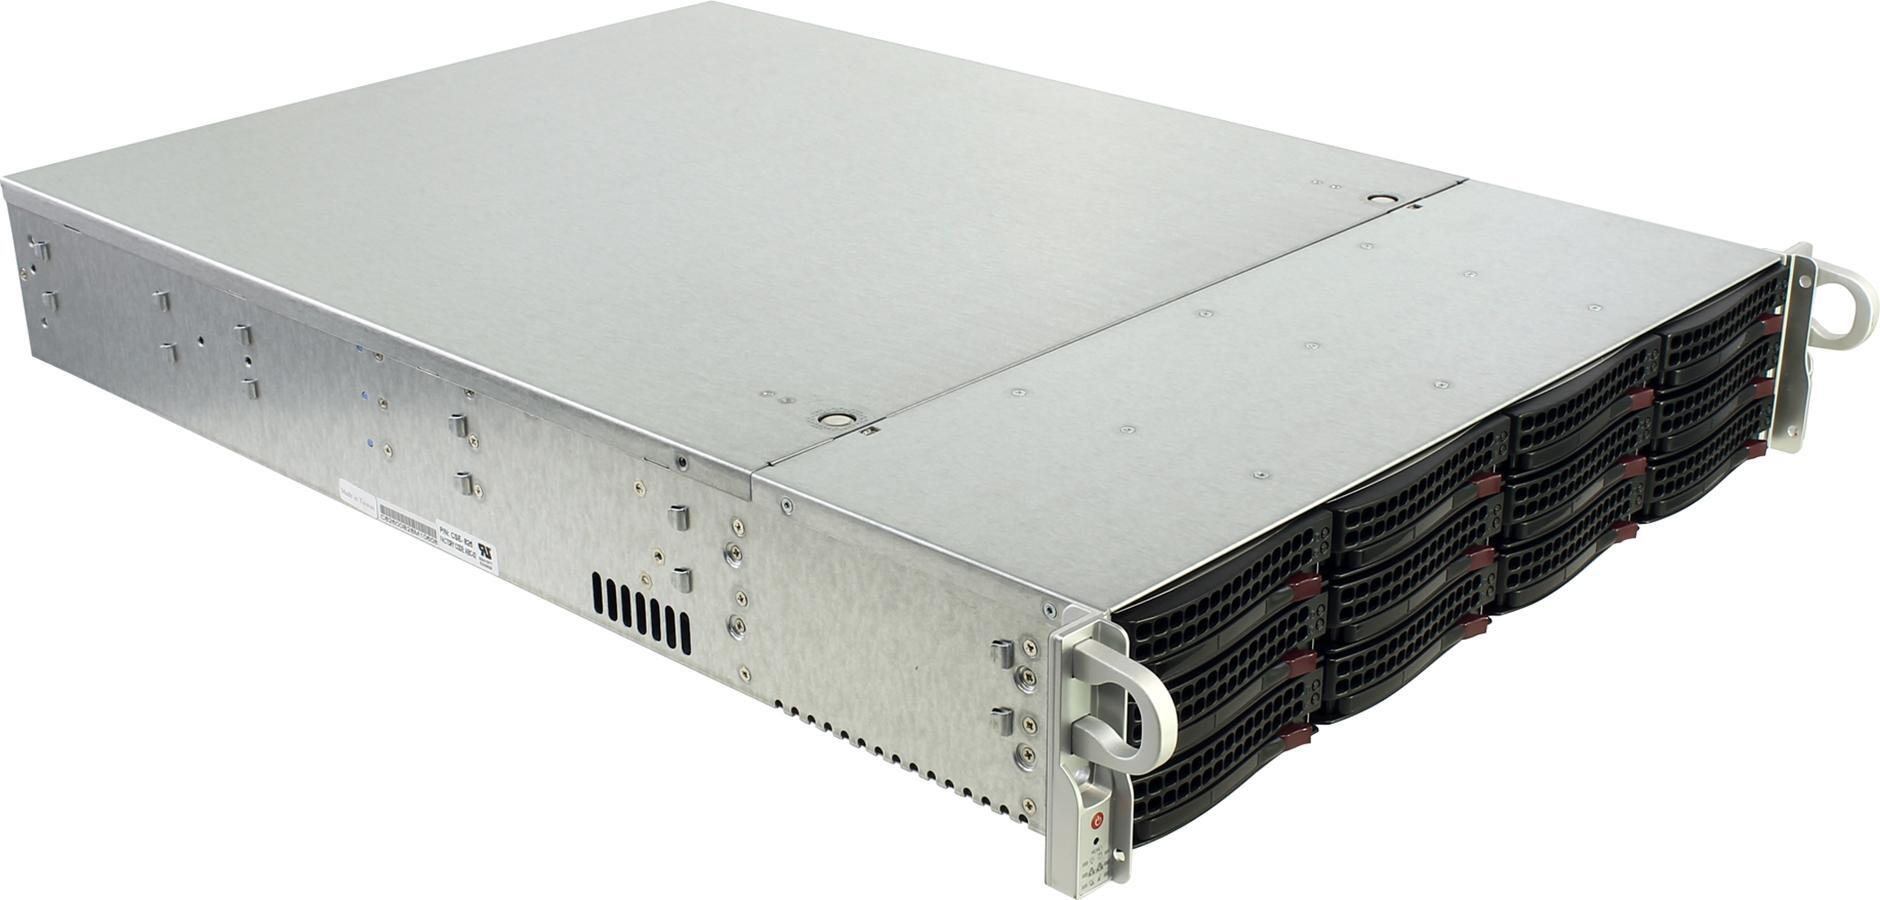 Шасси SUPERMICRO SuperChassis 826BE1C-R920LPB